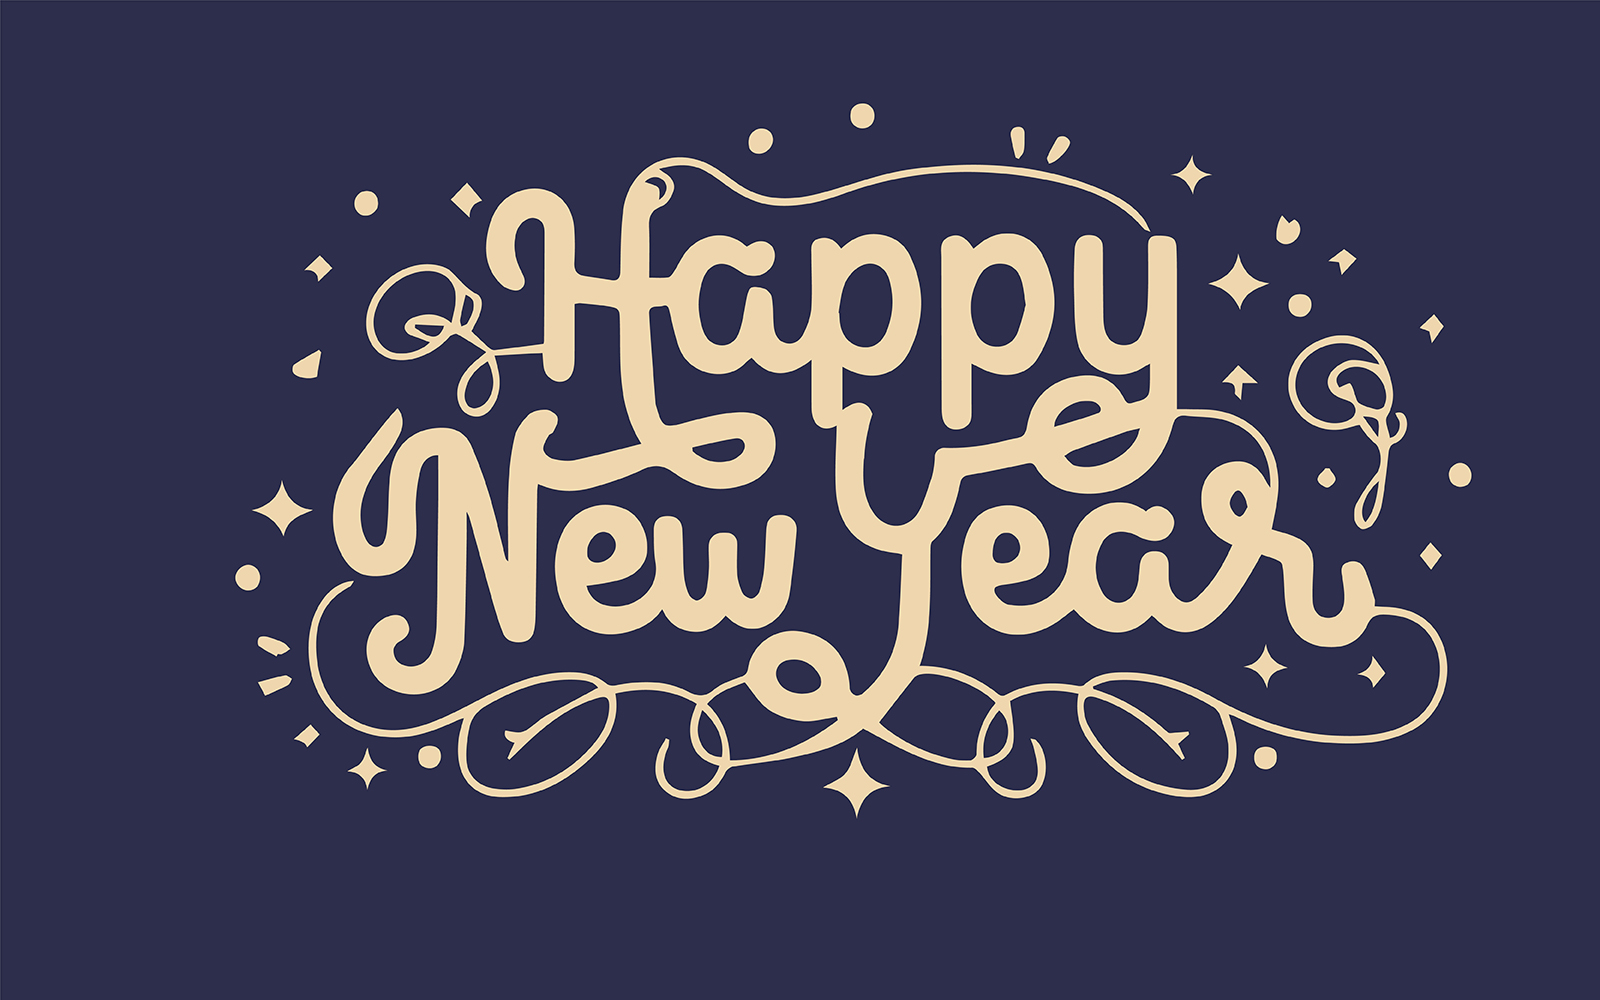 Happy New Year lettering text for greeting card Vector illustration